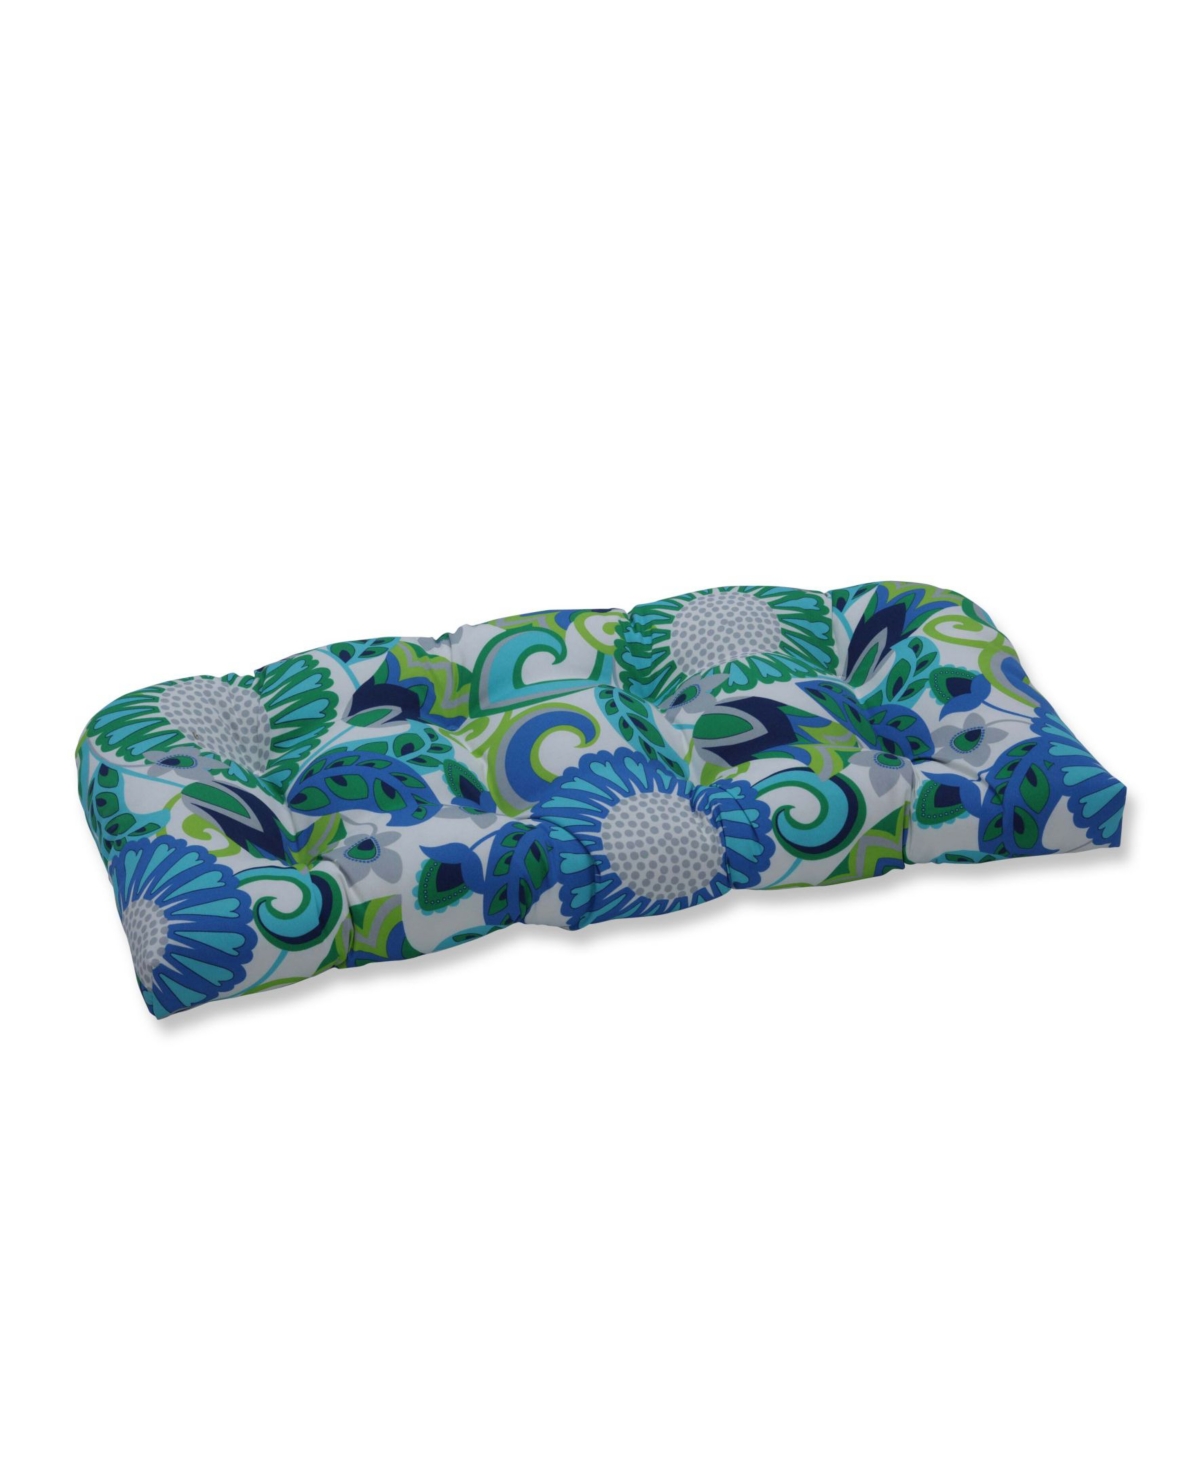 Sophia Floral 19" x 44" Tufted Outdoor Loveseat Cushion - Green